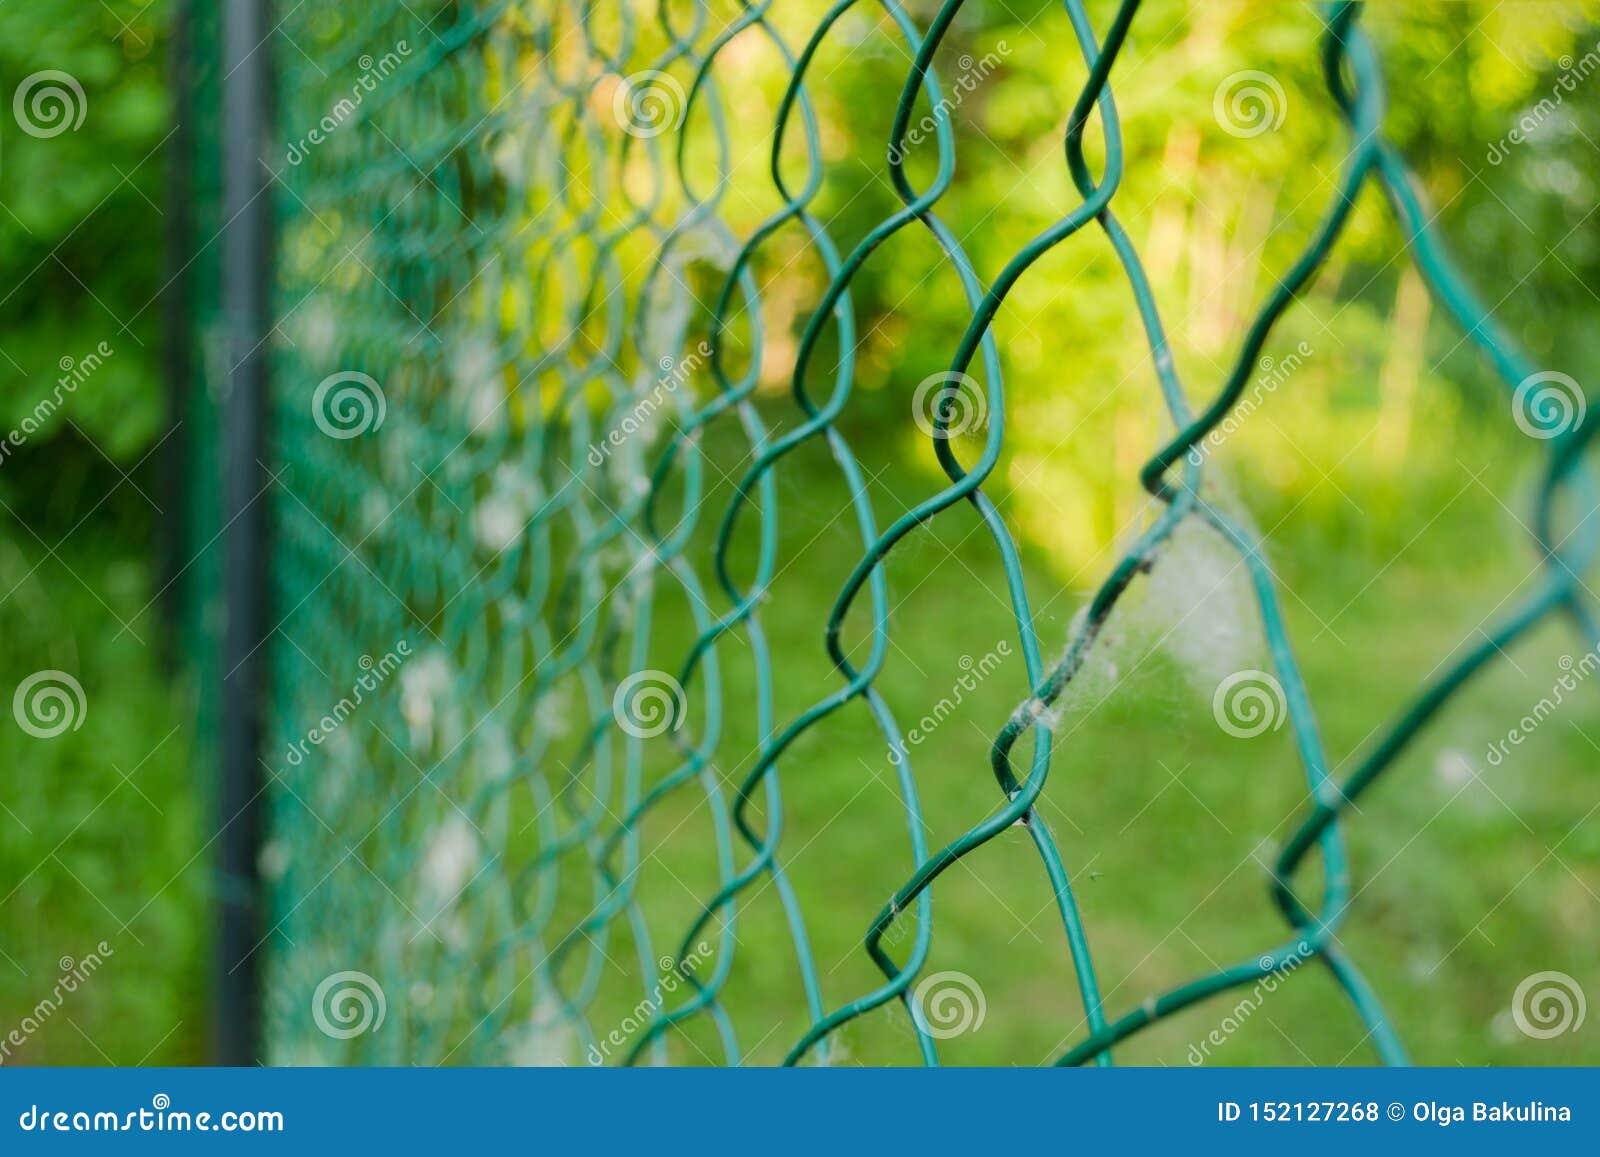 Close Up Of Metal Chain-link In The Garden. Diamond Mesh Wire Fence On ...
